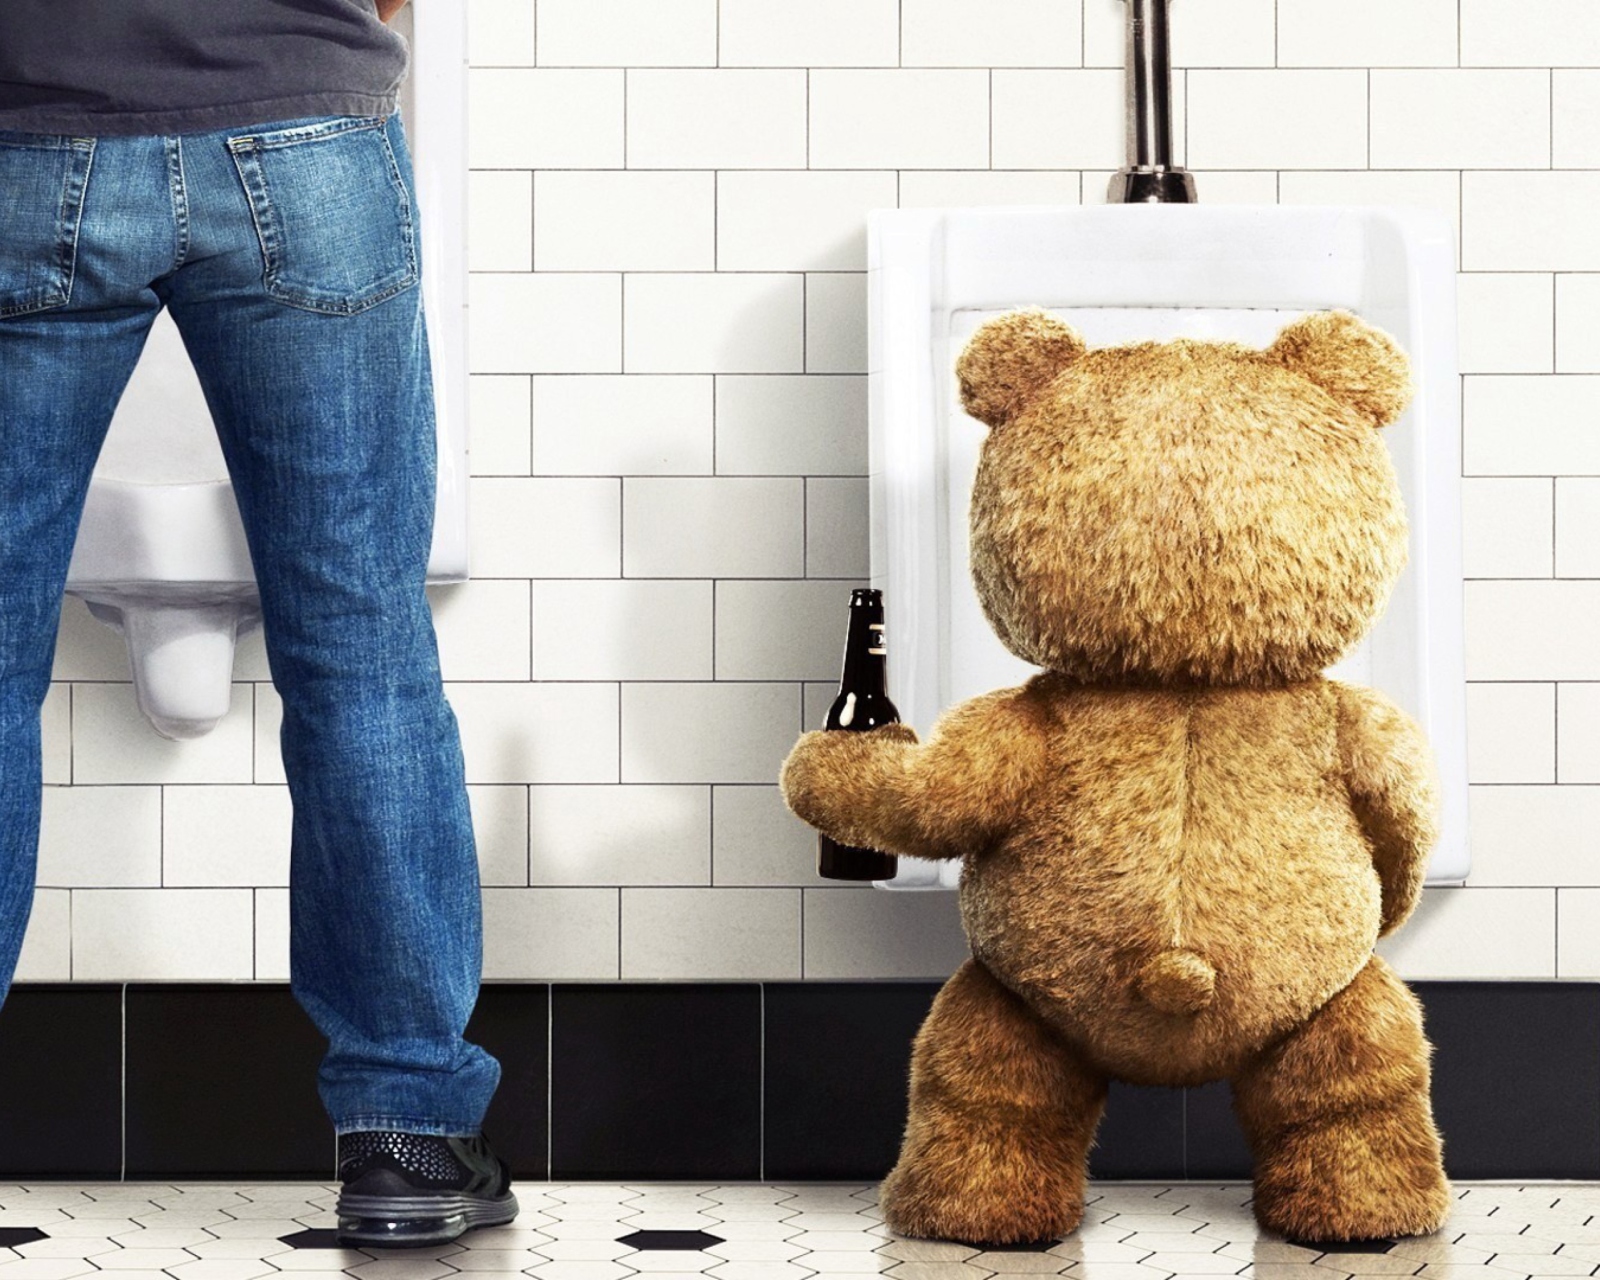 Ted Poster wallpaper 1600x1280